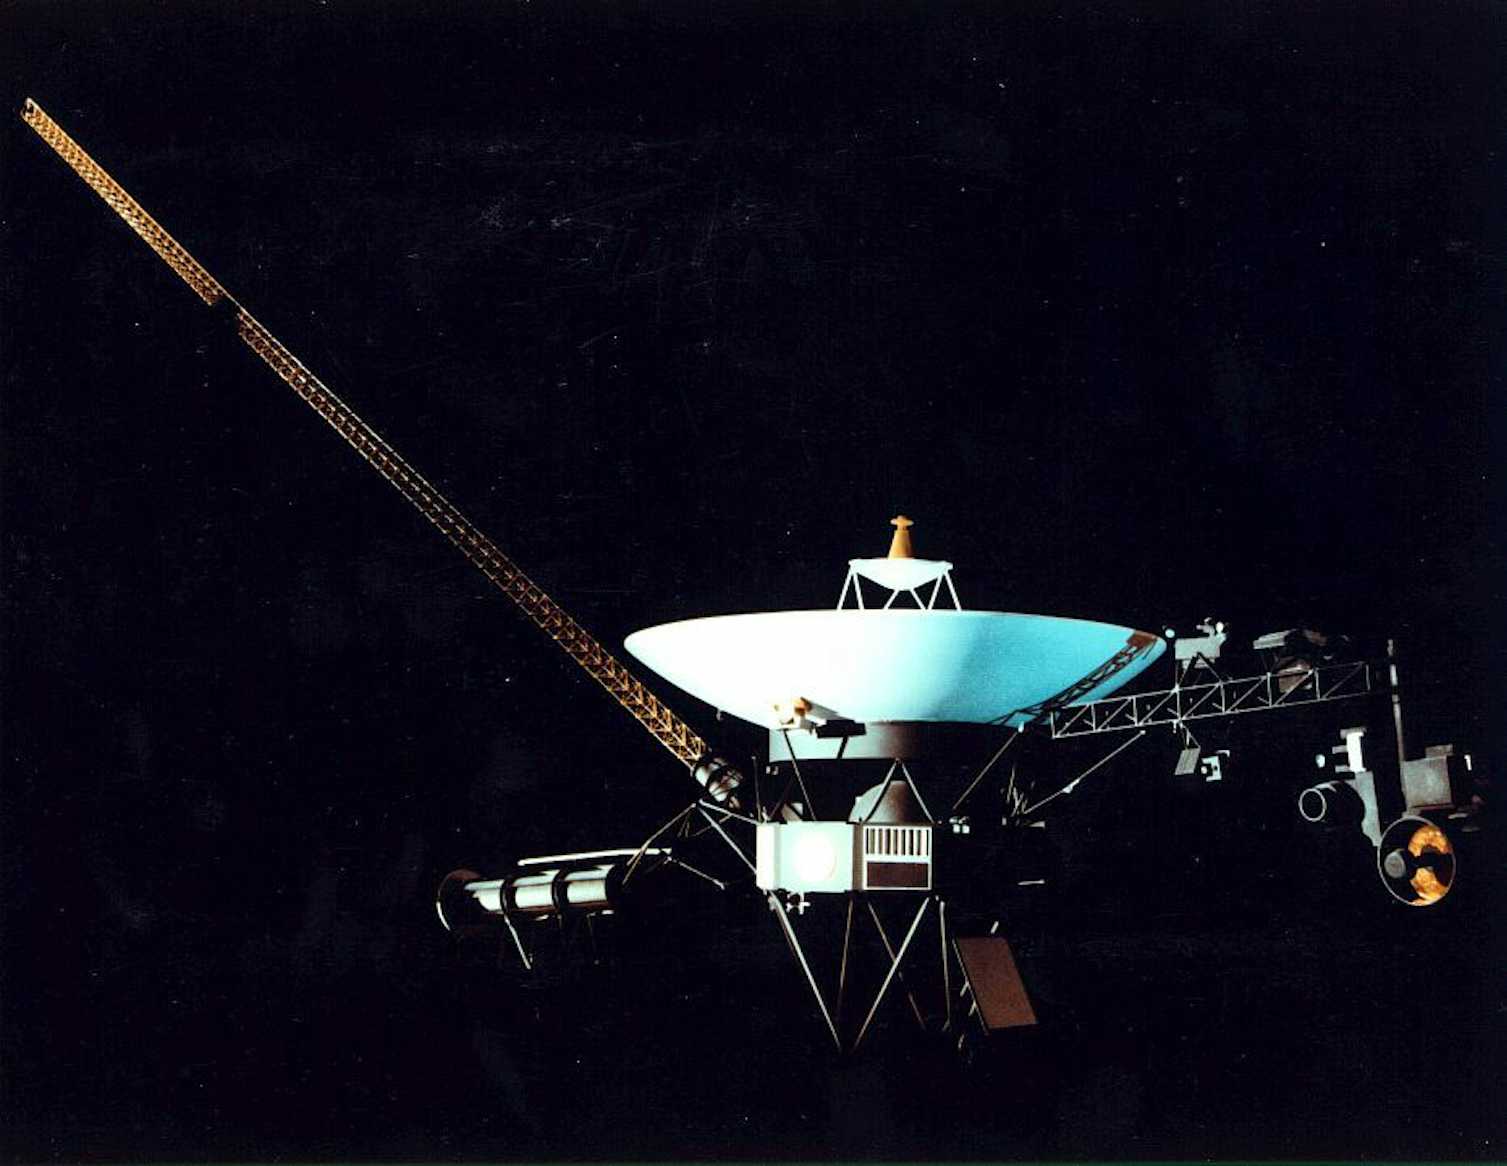 voyager 2 all pictures